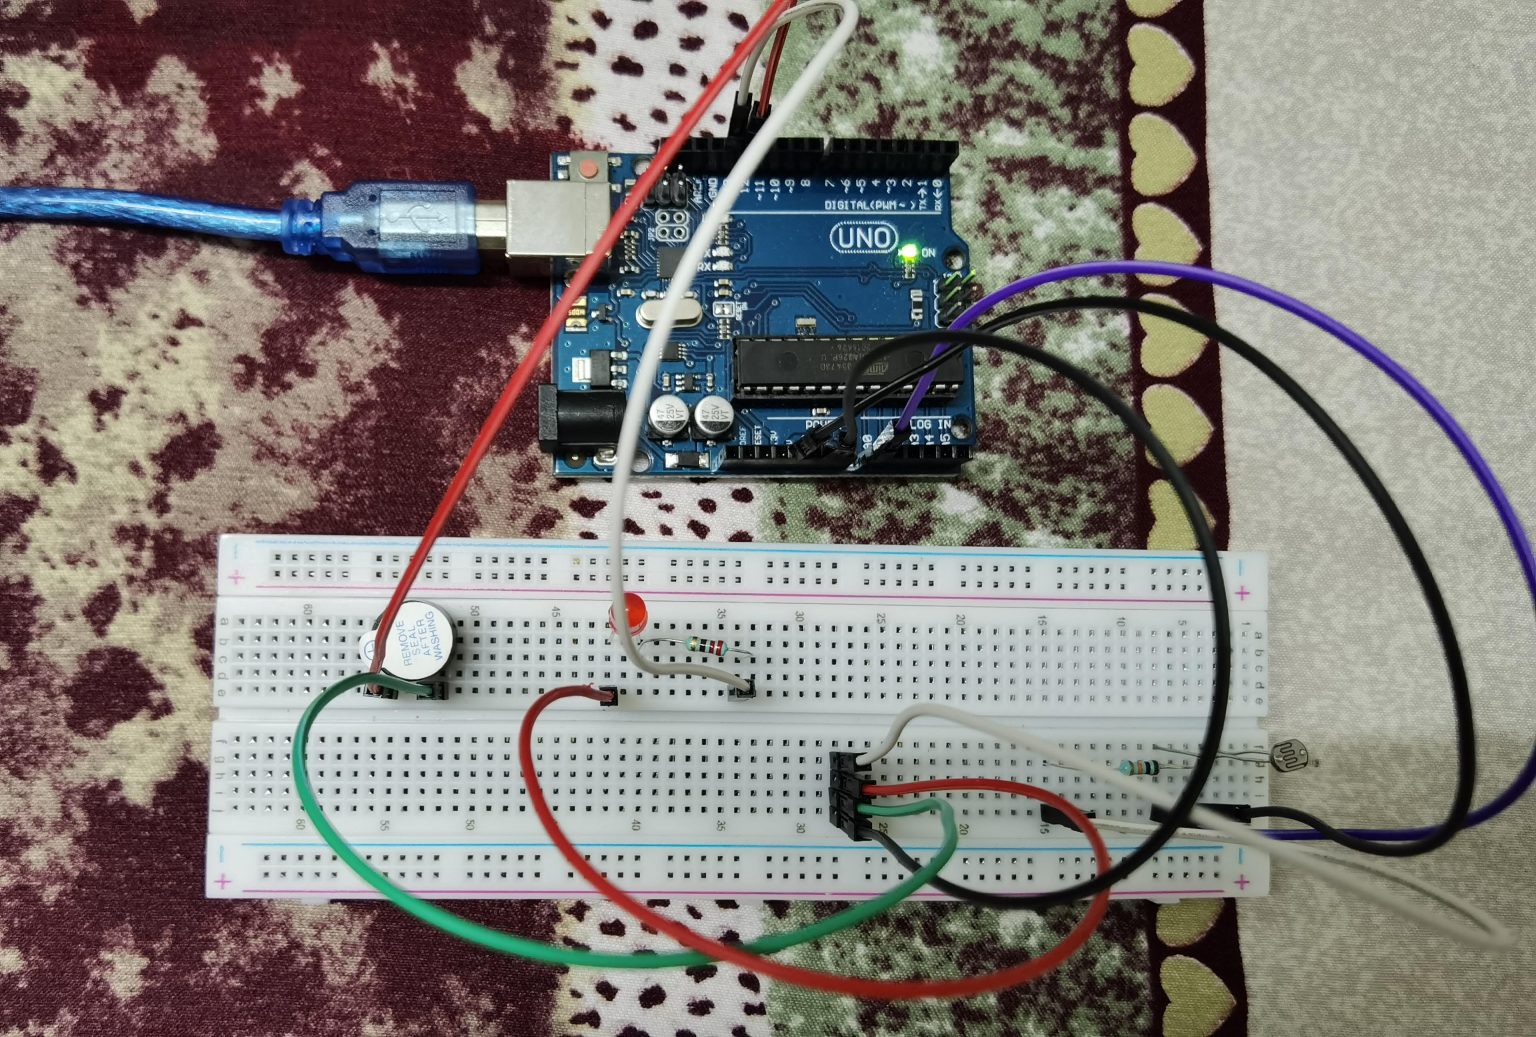 Use Photoresistor With Led And Buzzer On Arduino Uno Prgmine